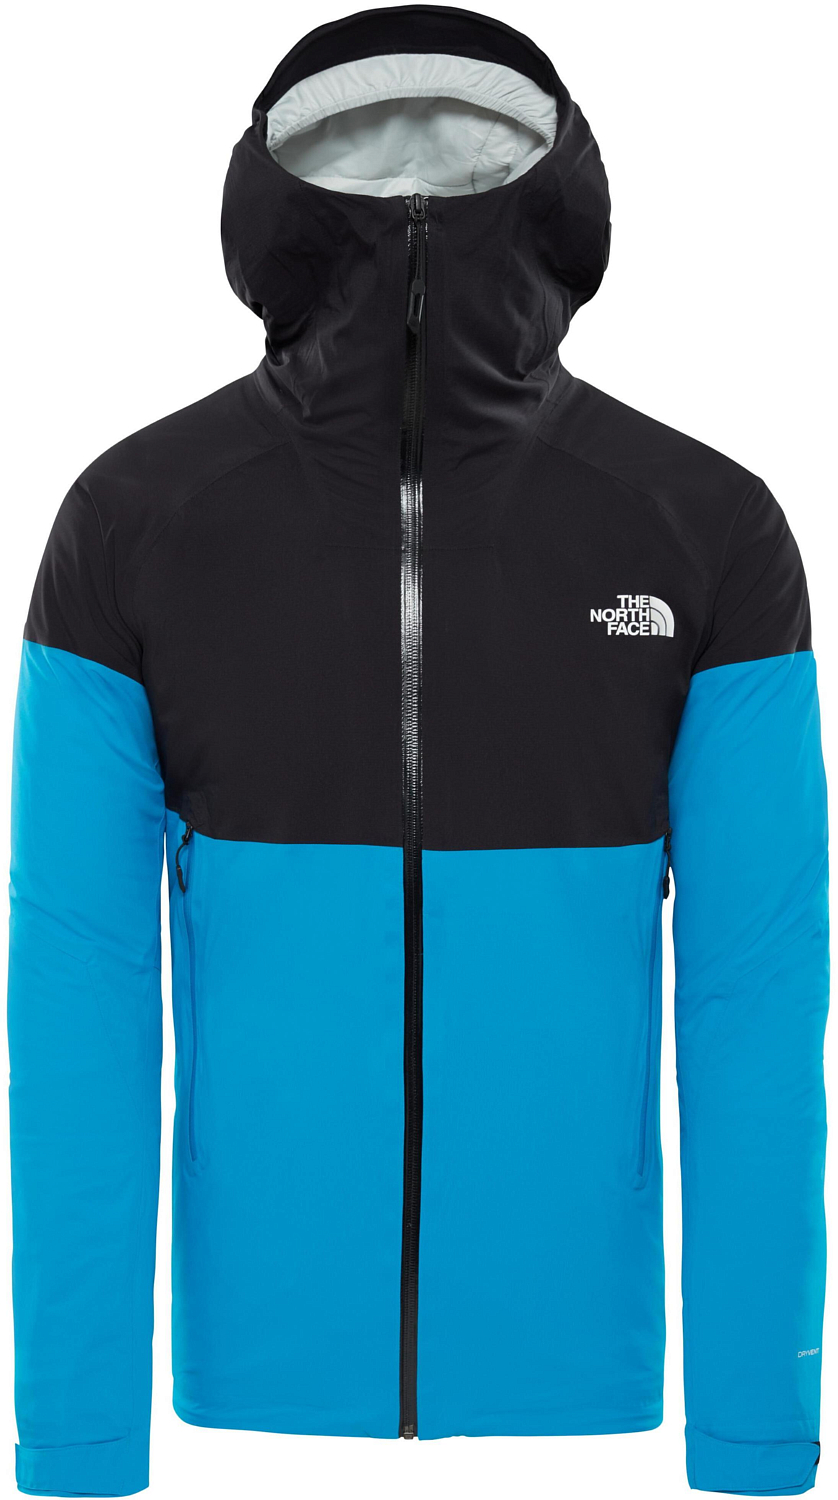 Куртка The North Face 2018-19 IMPENDOR INS JKT HYPER BLUE/TNF